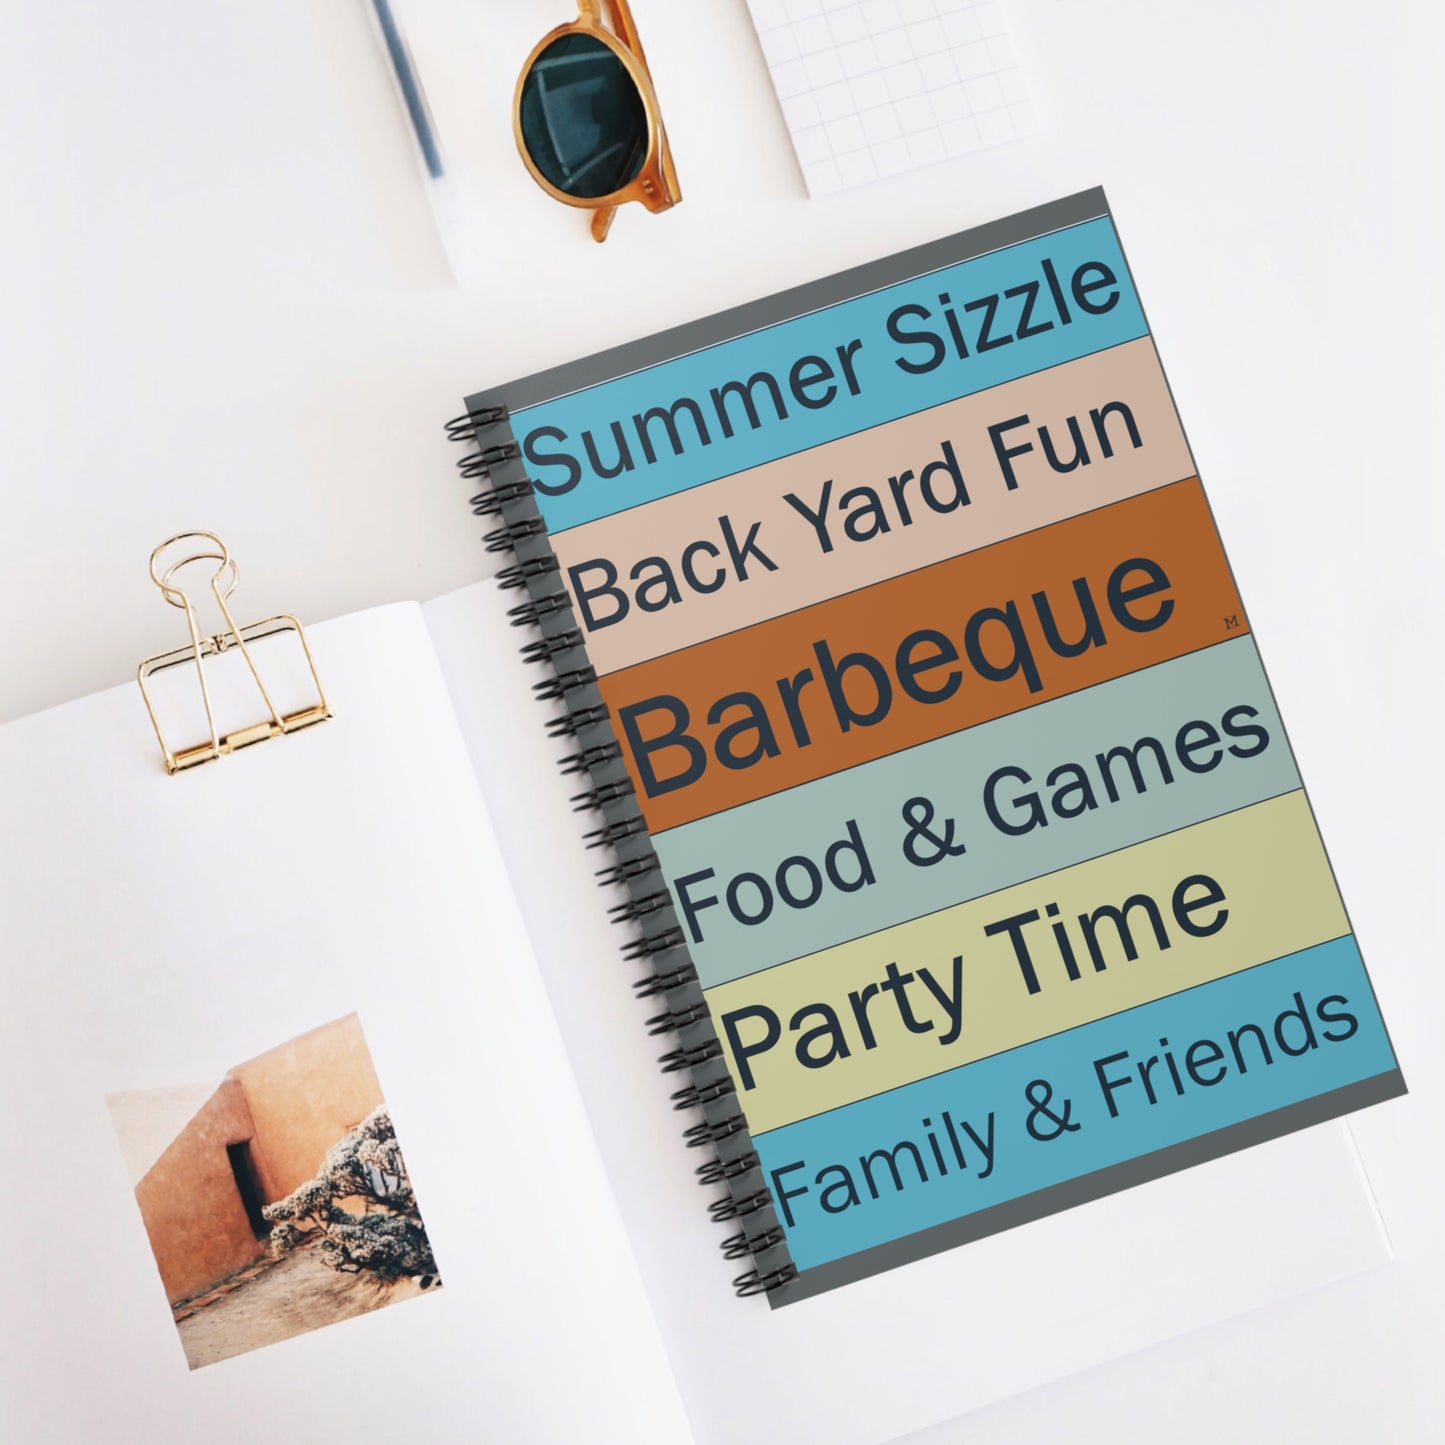 Summer Sizzle Fun BBQ Party Games Friends by MII Designs Spiral Notebook - Ruled Line